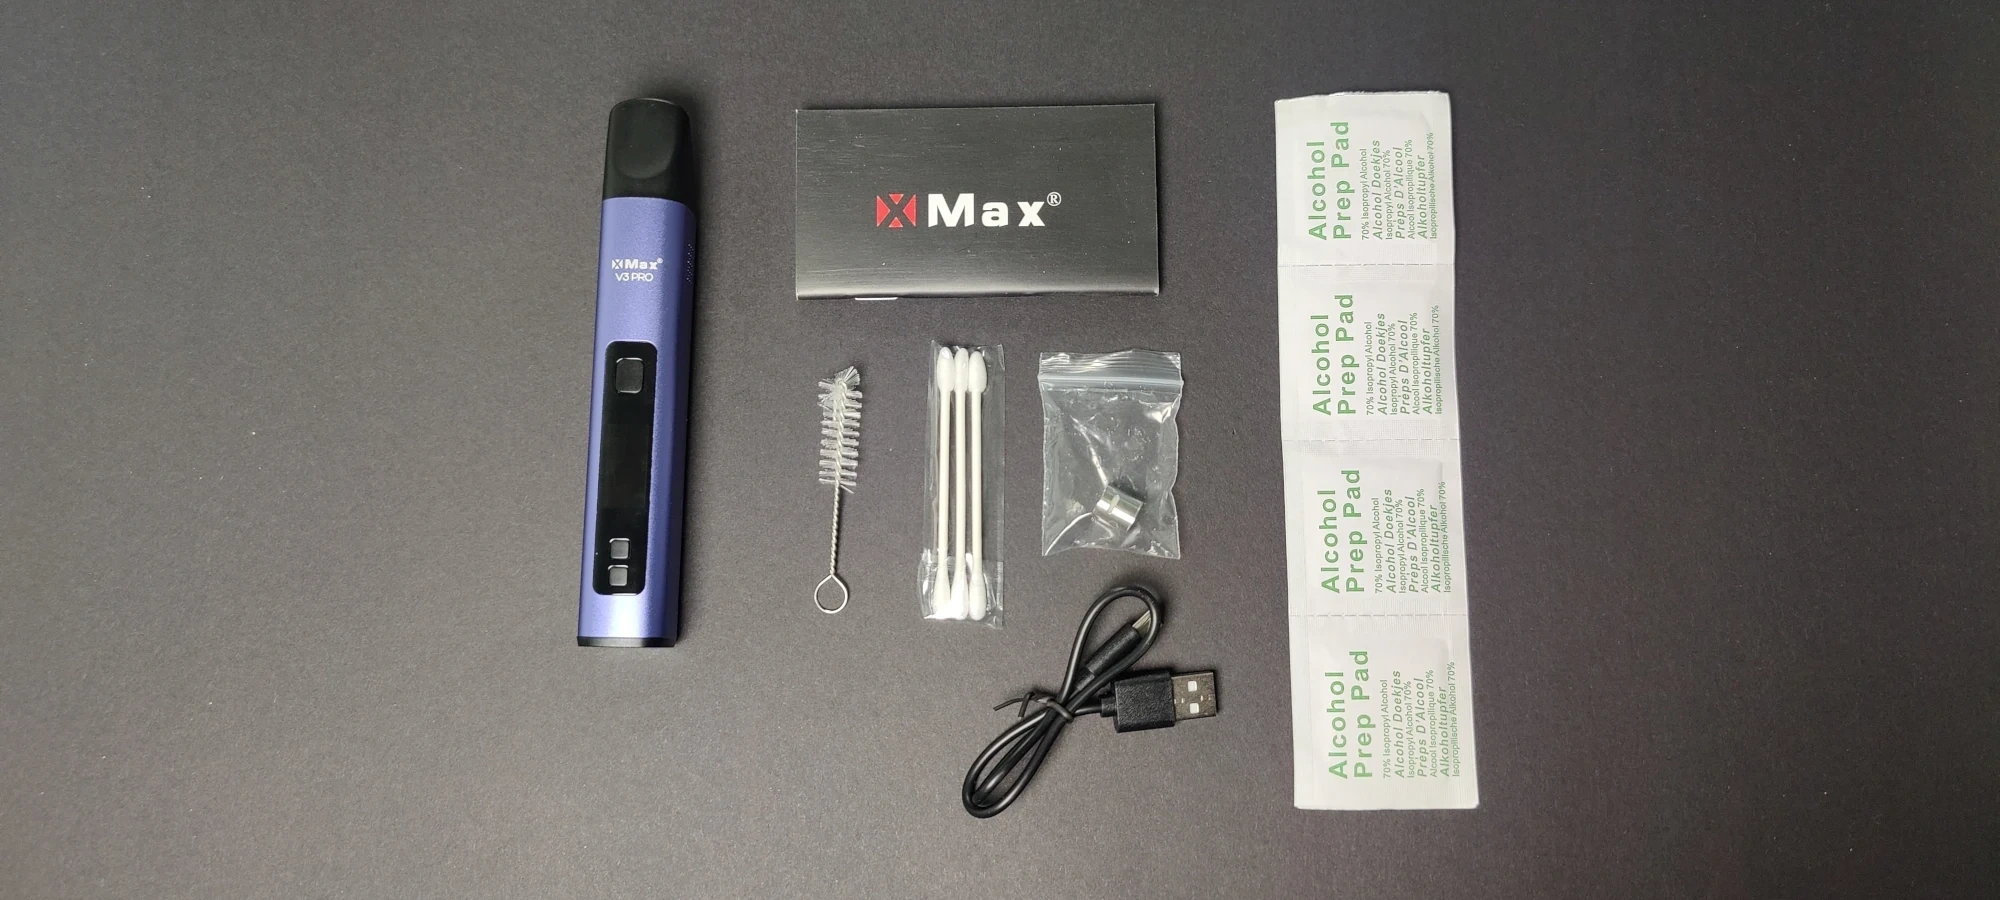 XMAX V3 Pro package contents